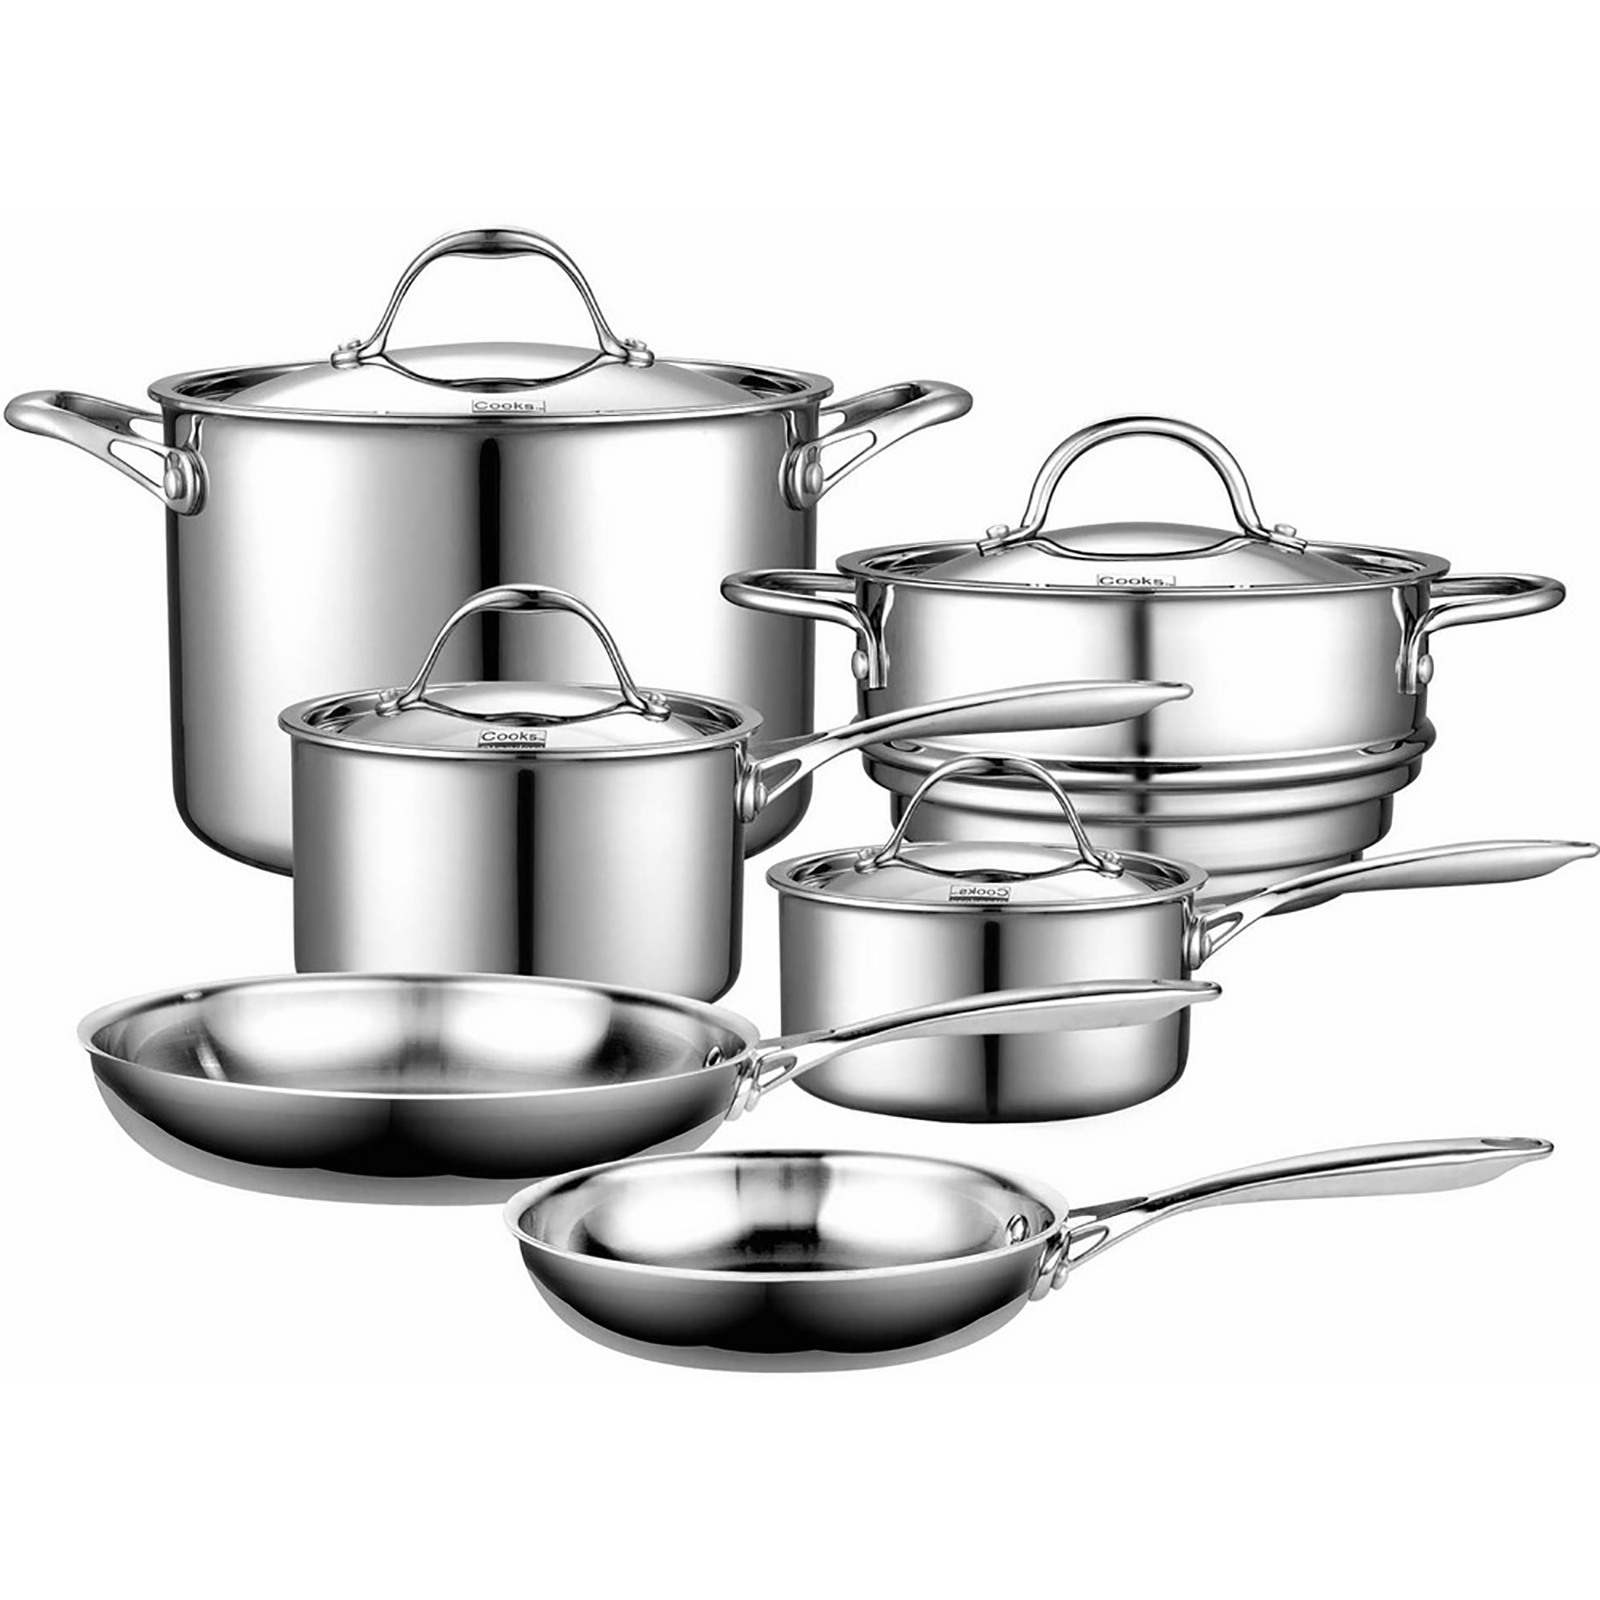 Cooks Standard 10pc. Multi-Ply Clad Stainless Steel Cookware Set